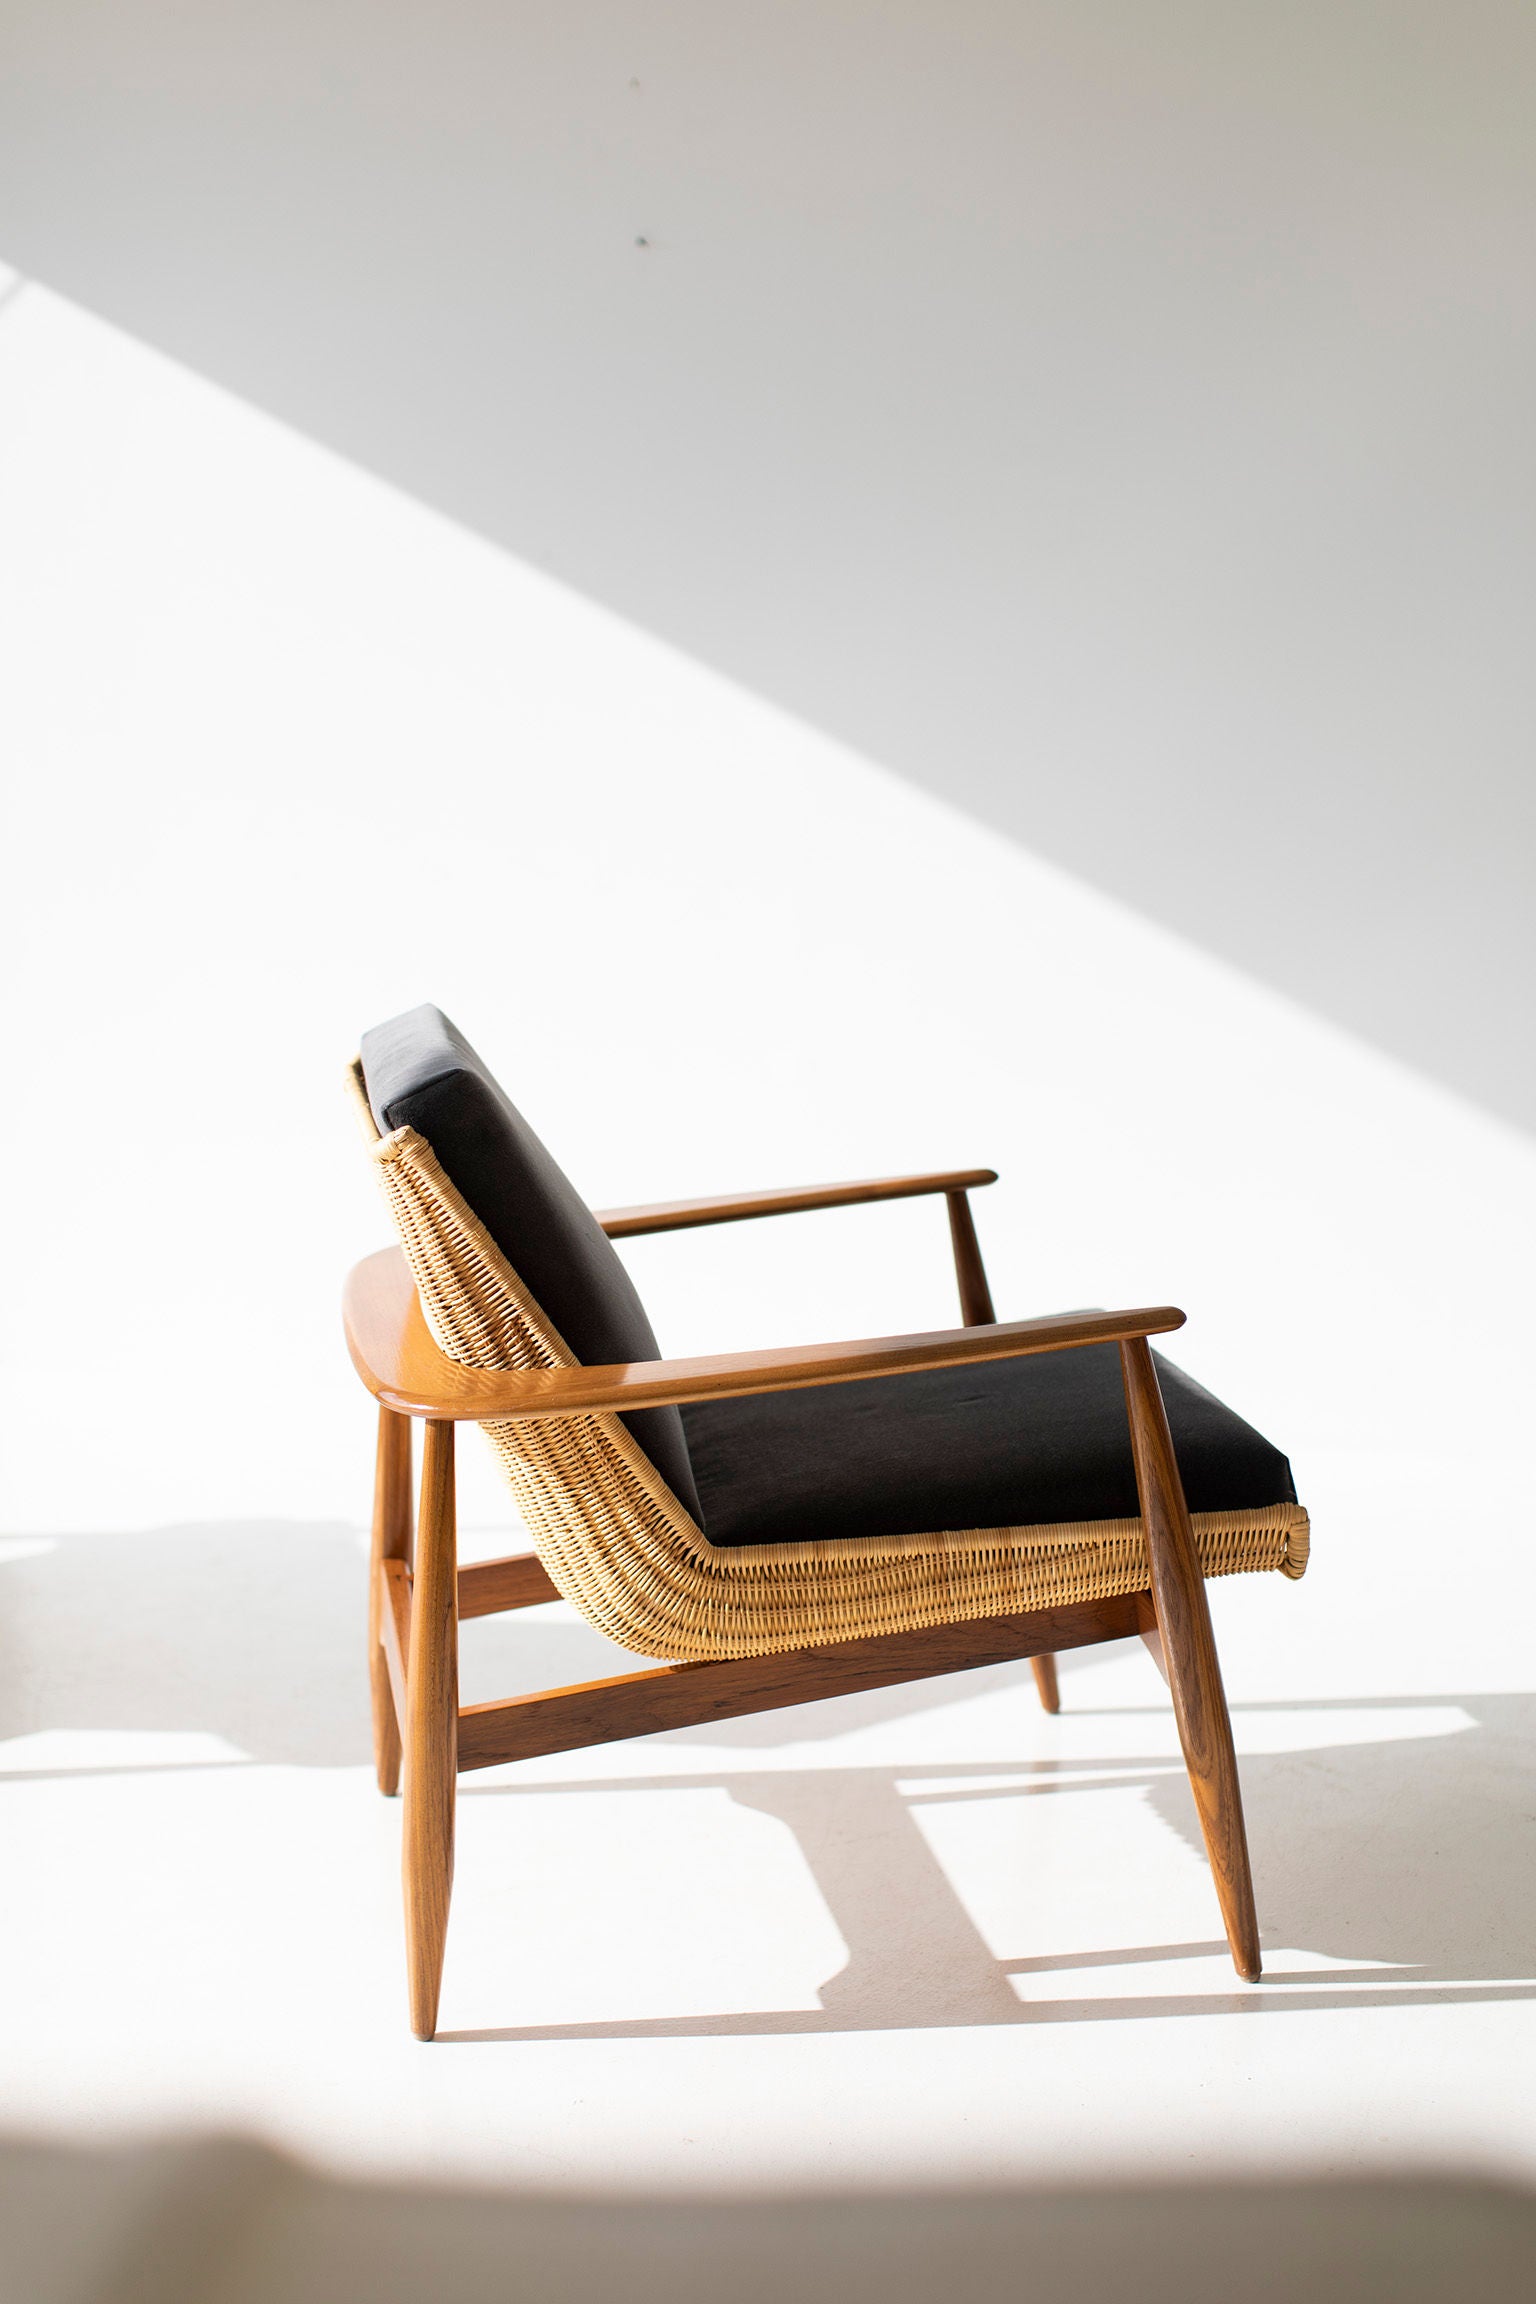 Lawrence-Peabody-Wicker-Lounge-Chairs-01